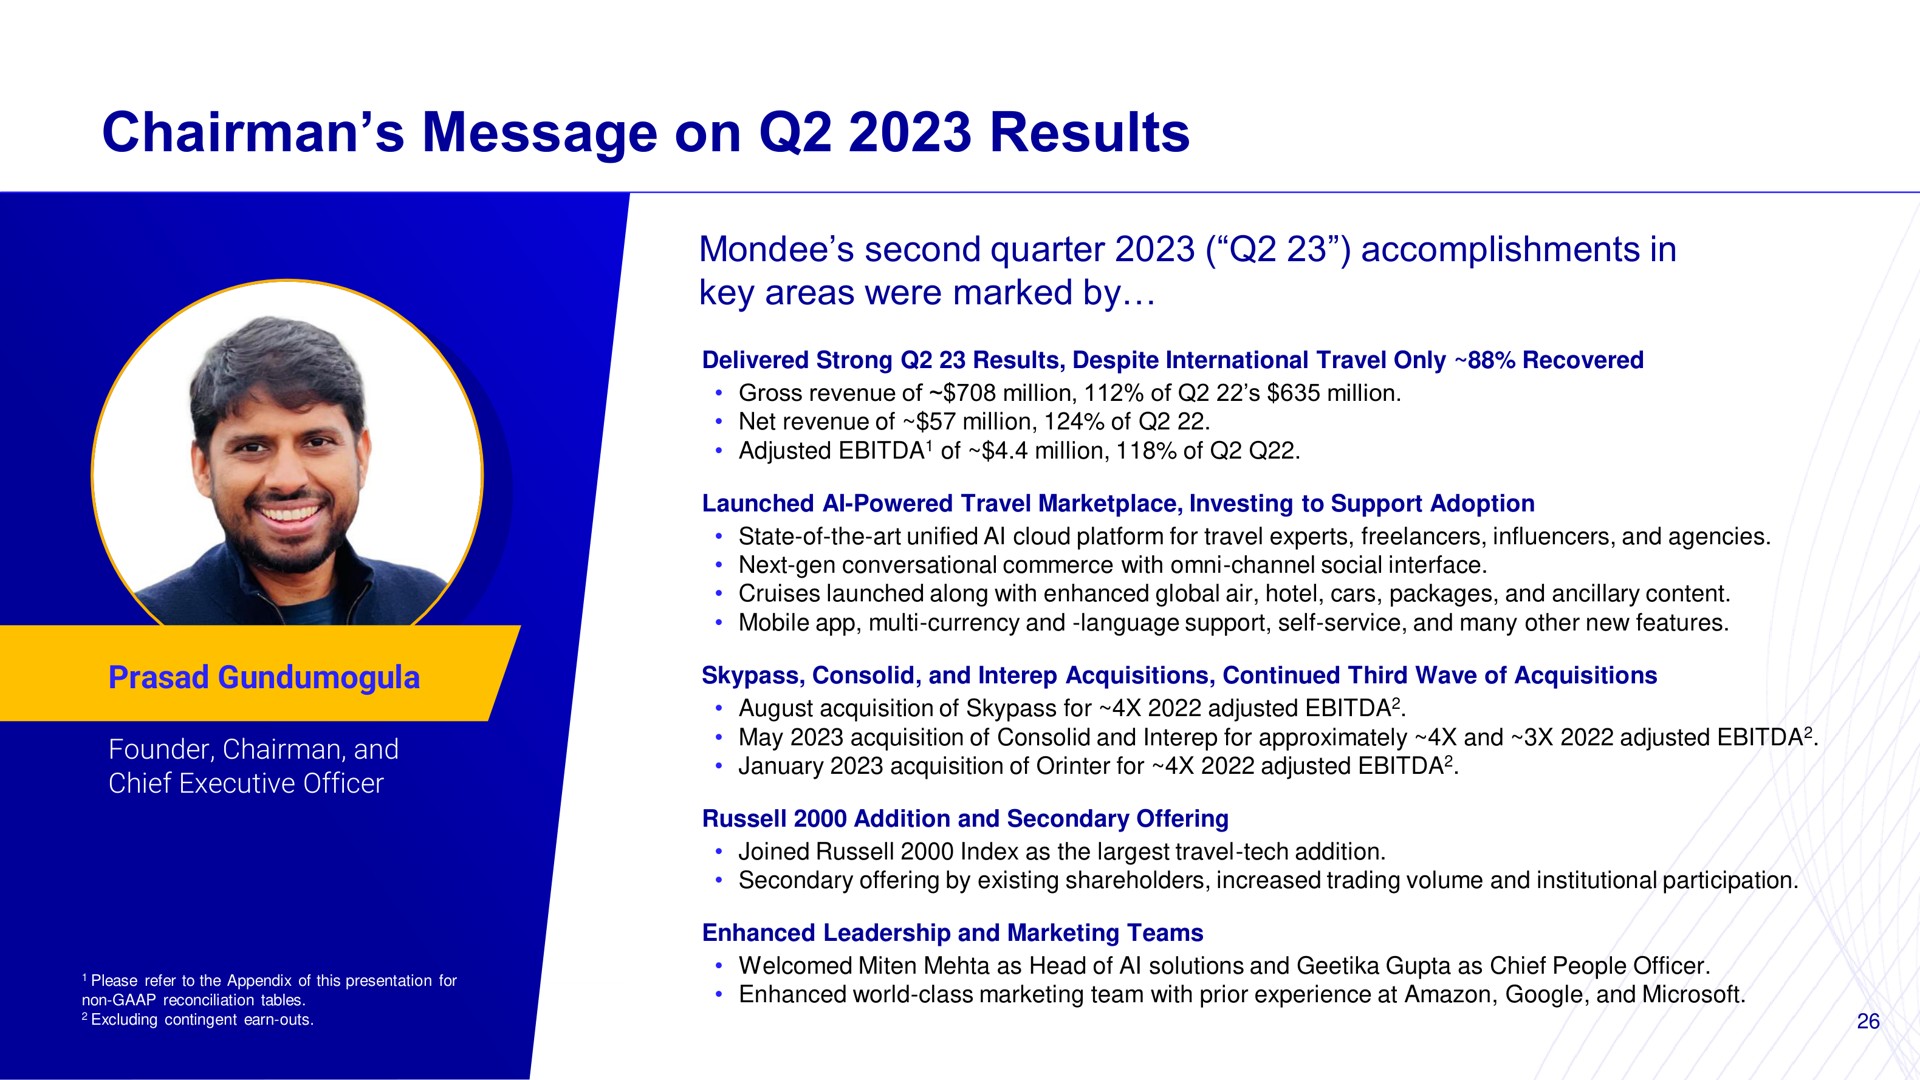 chairman message on results | Mondee